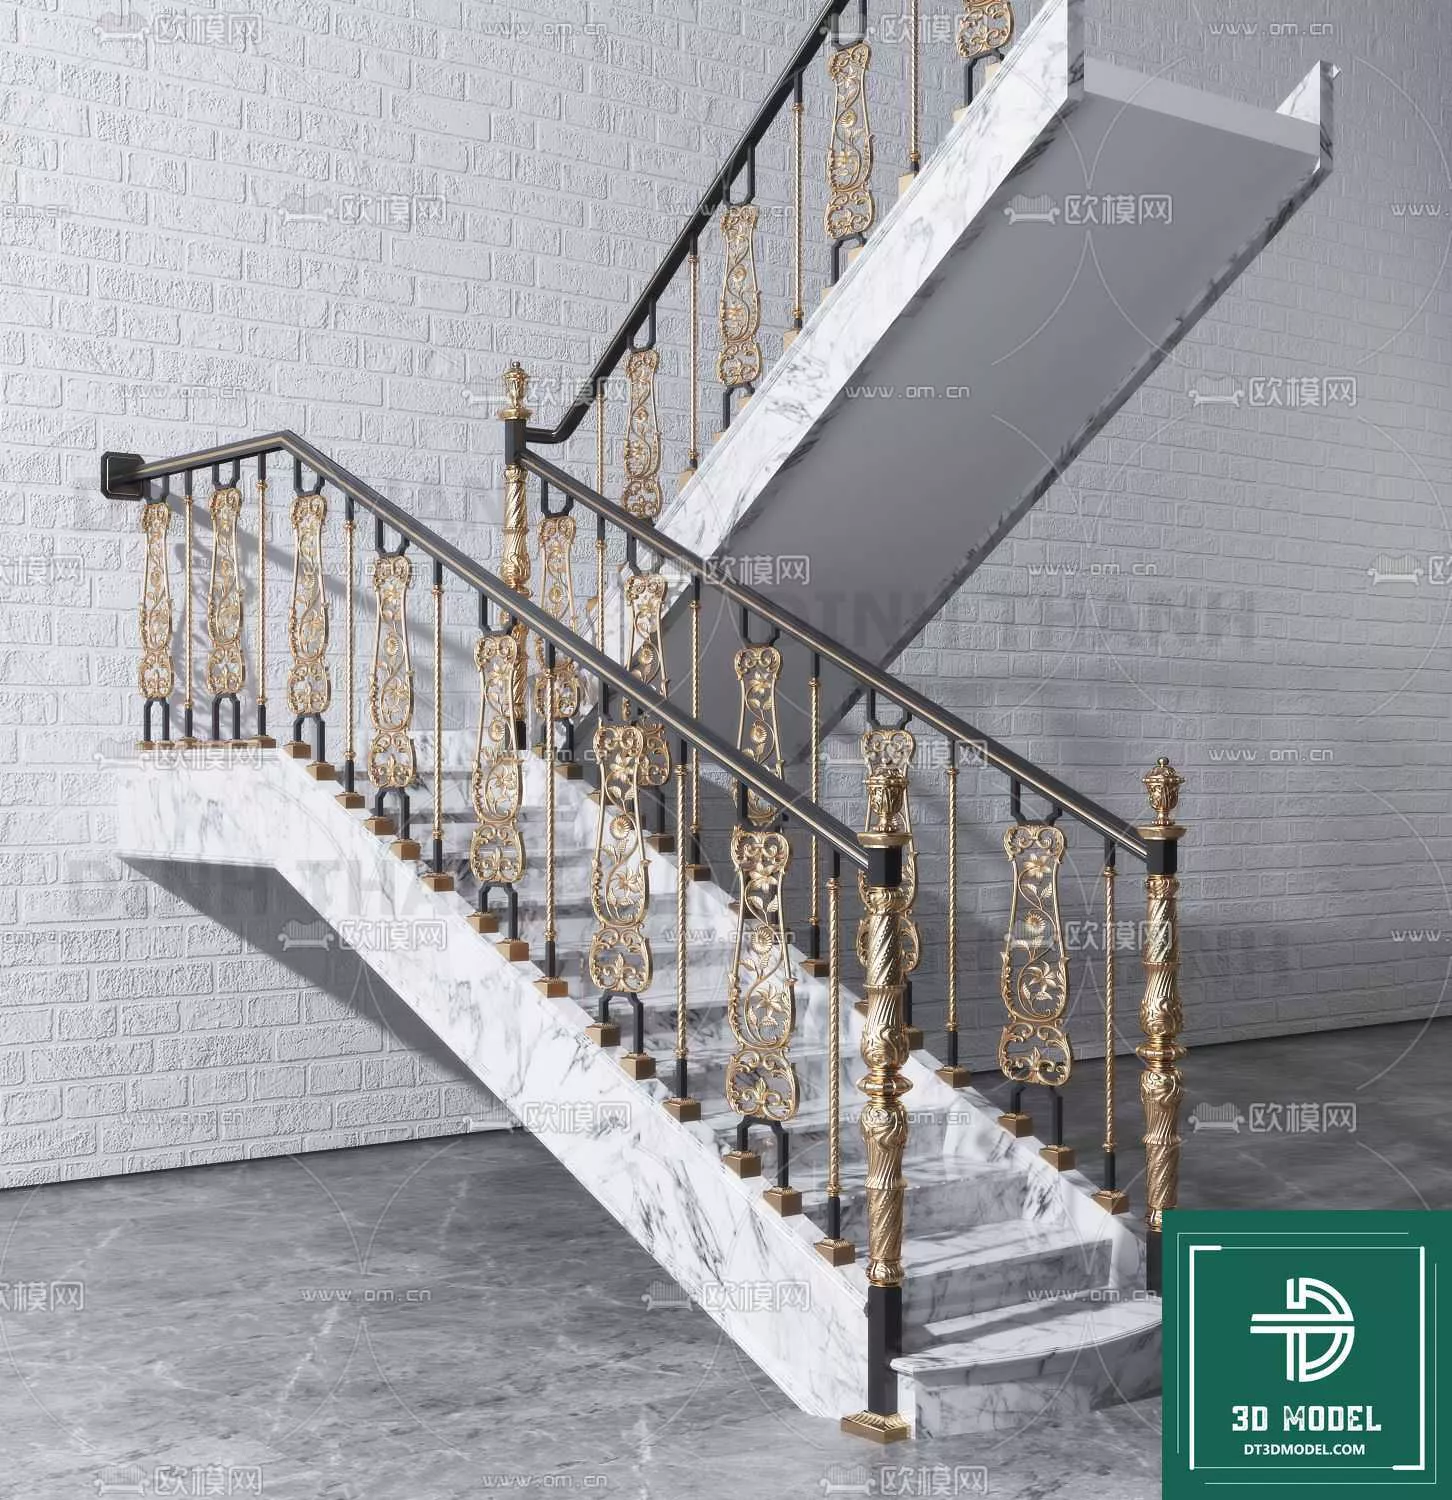 MODERN STAIR - SKETCHUP 3D MODEL - VRAY OR ENSCAPE - ID14262